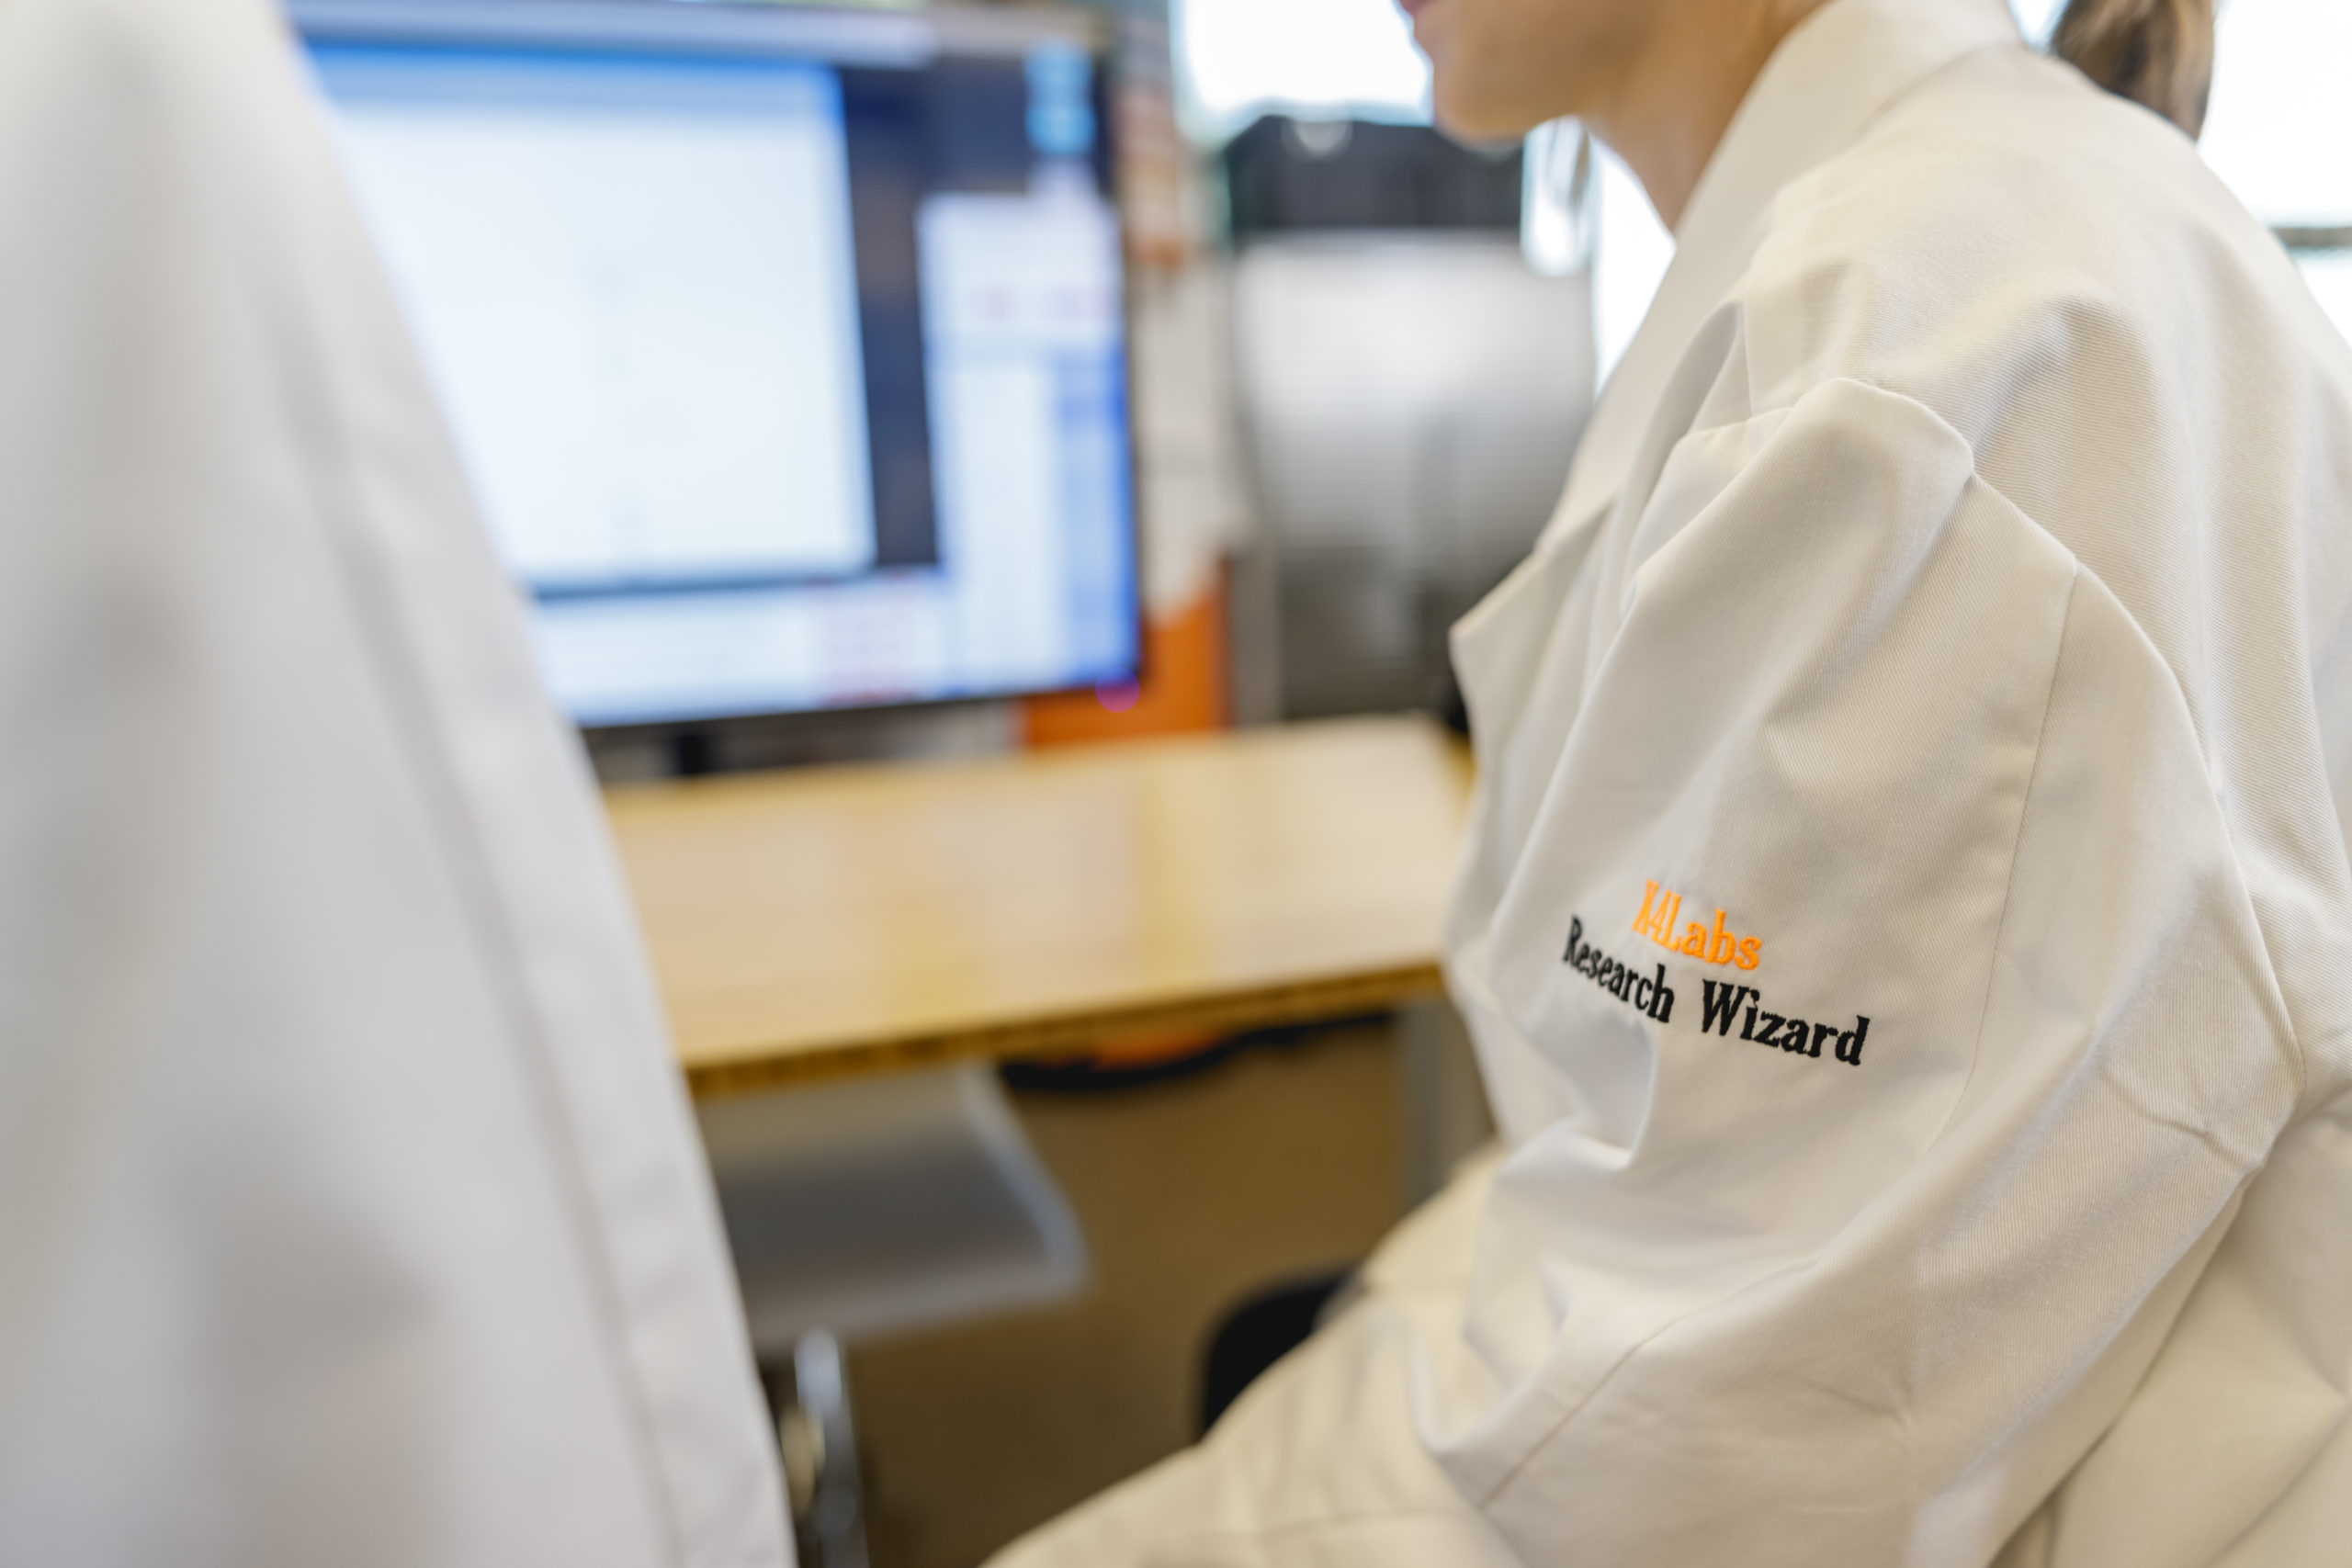 Two K4Labs team members discuss projects in Research Wizard branded lab coats